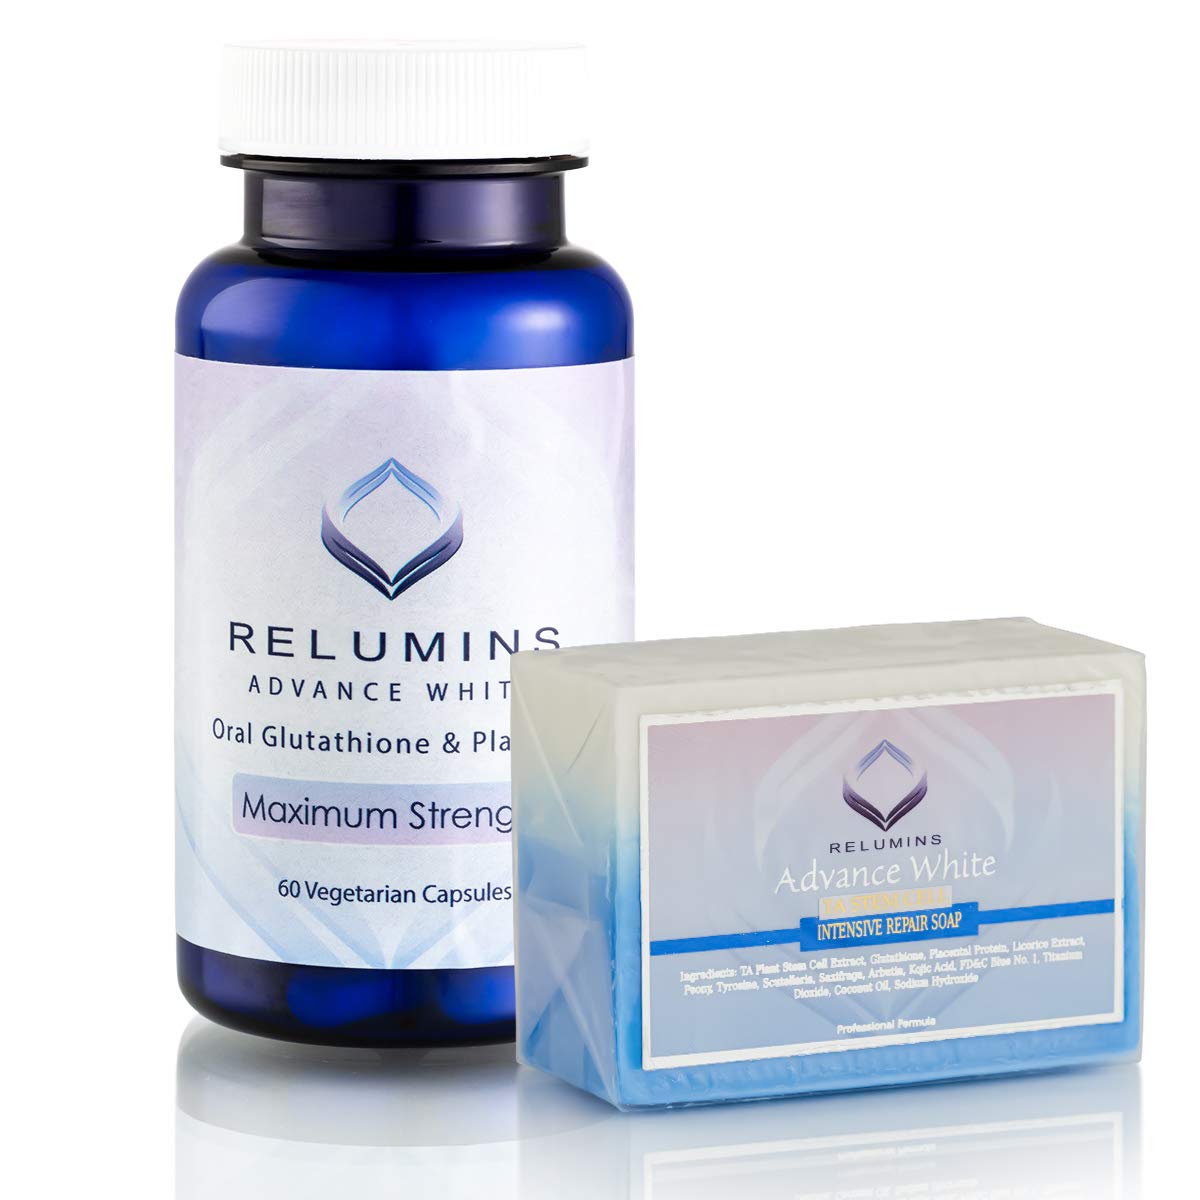 Relumins FREE Facial Massager Advance White Oral Glutathione W/FREE Stem Cell Intensive Repair Soap- NEW and Improved Now with Rose Hips